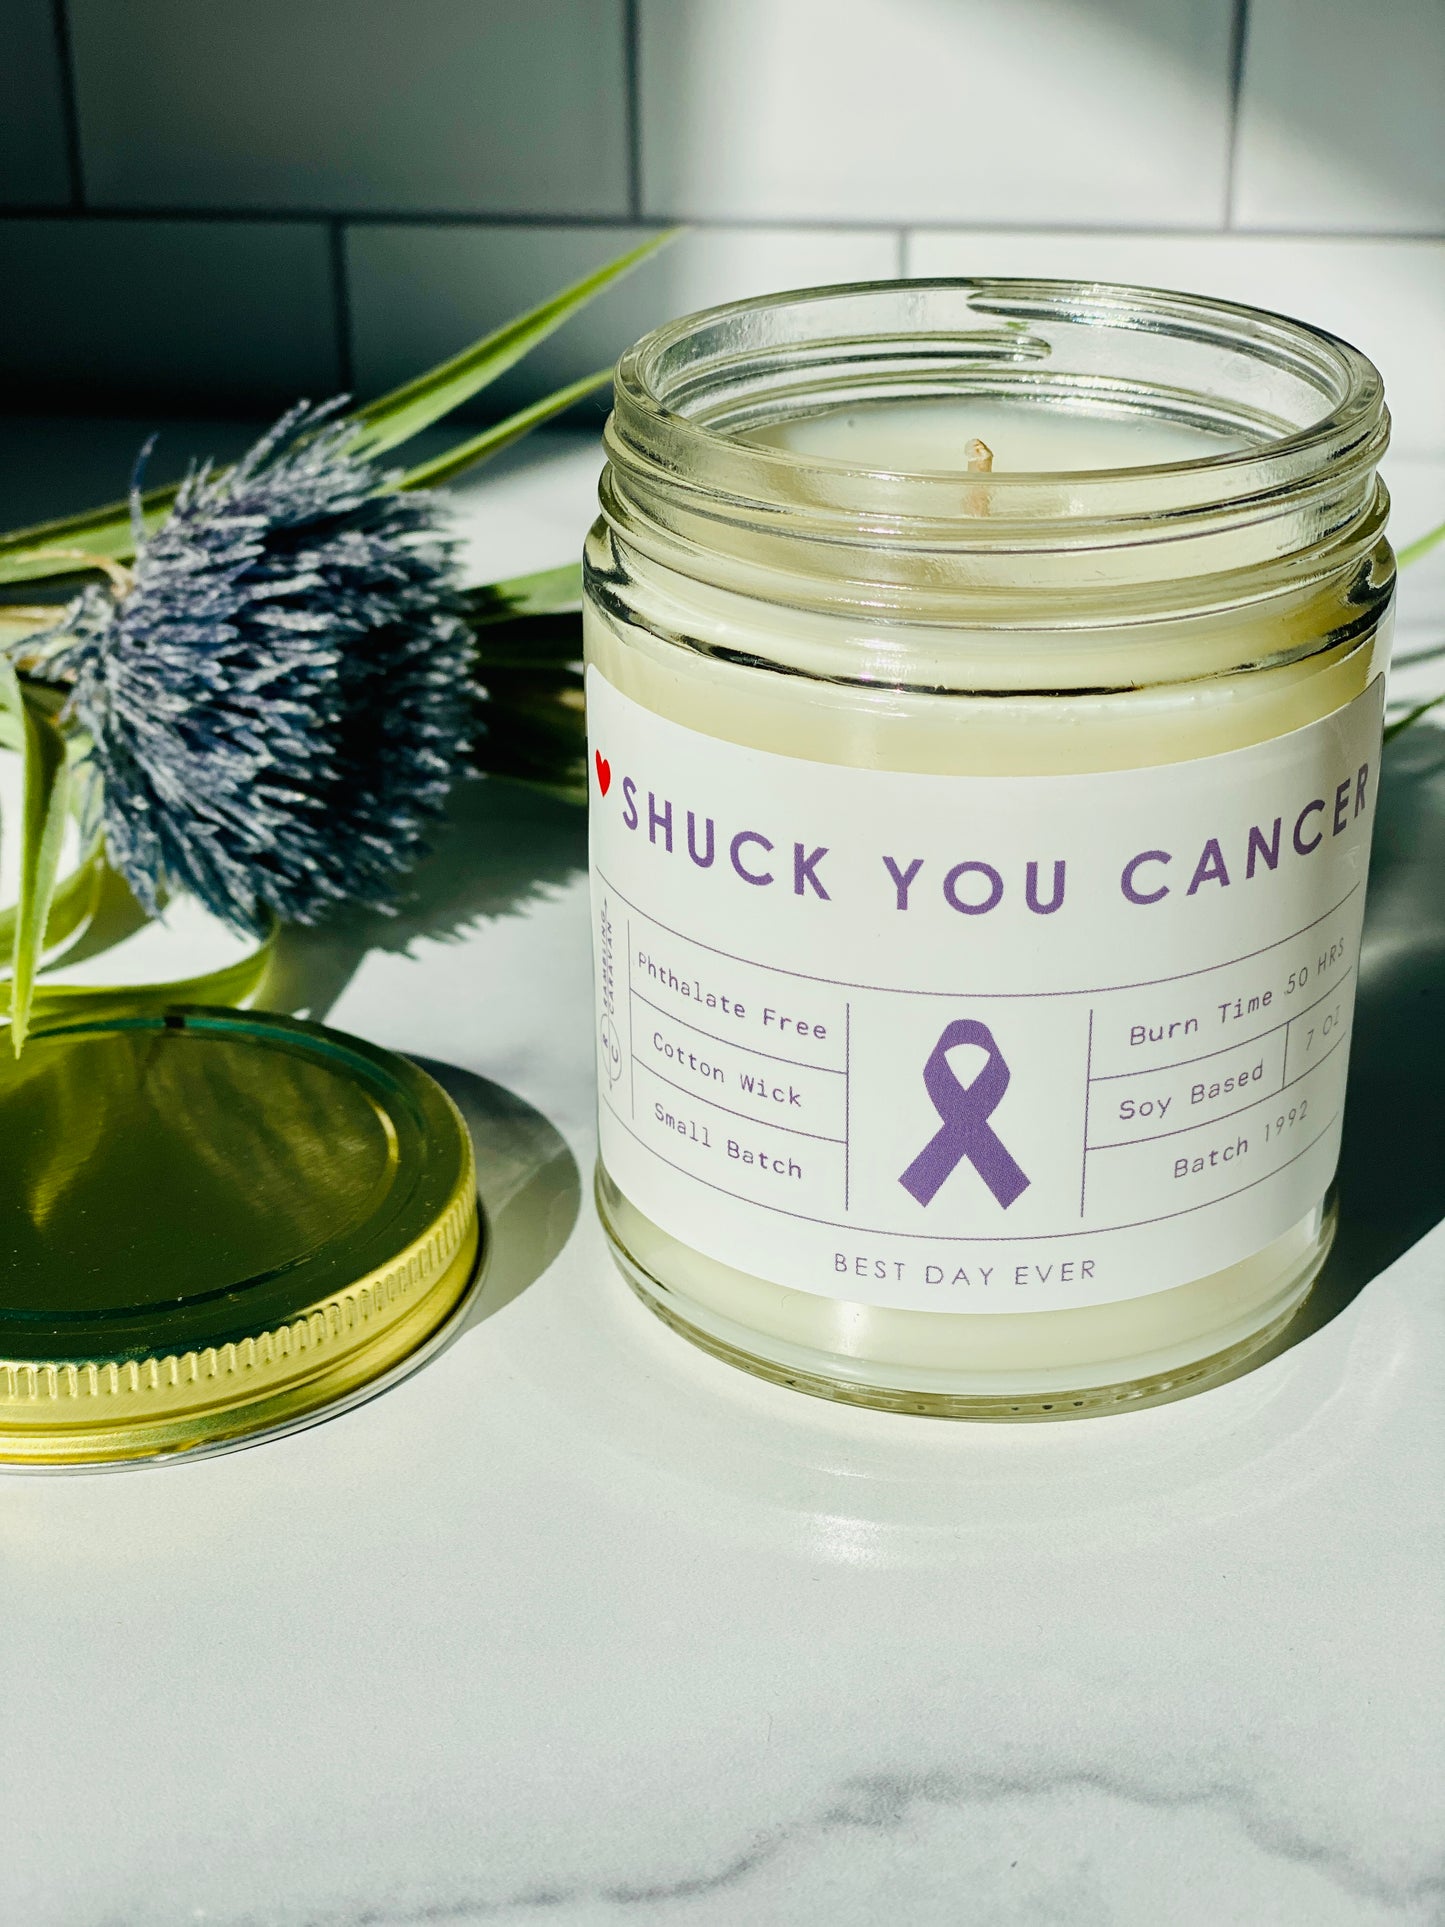 Shuck You Cancer (General) Purple Candle